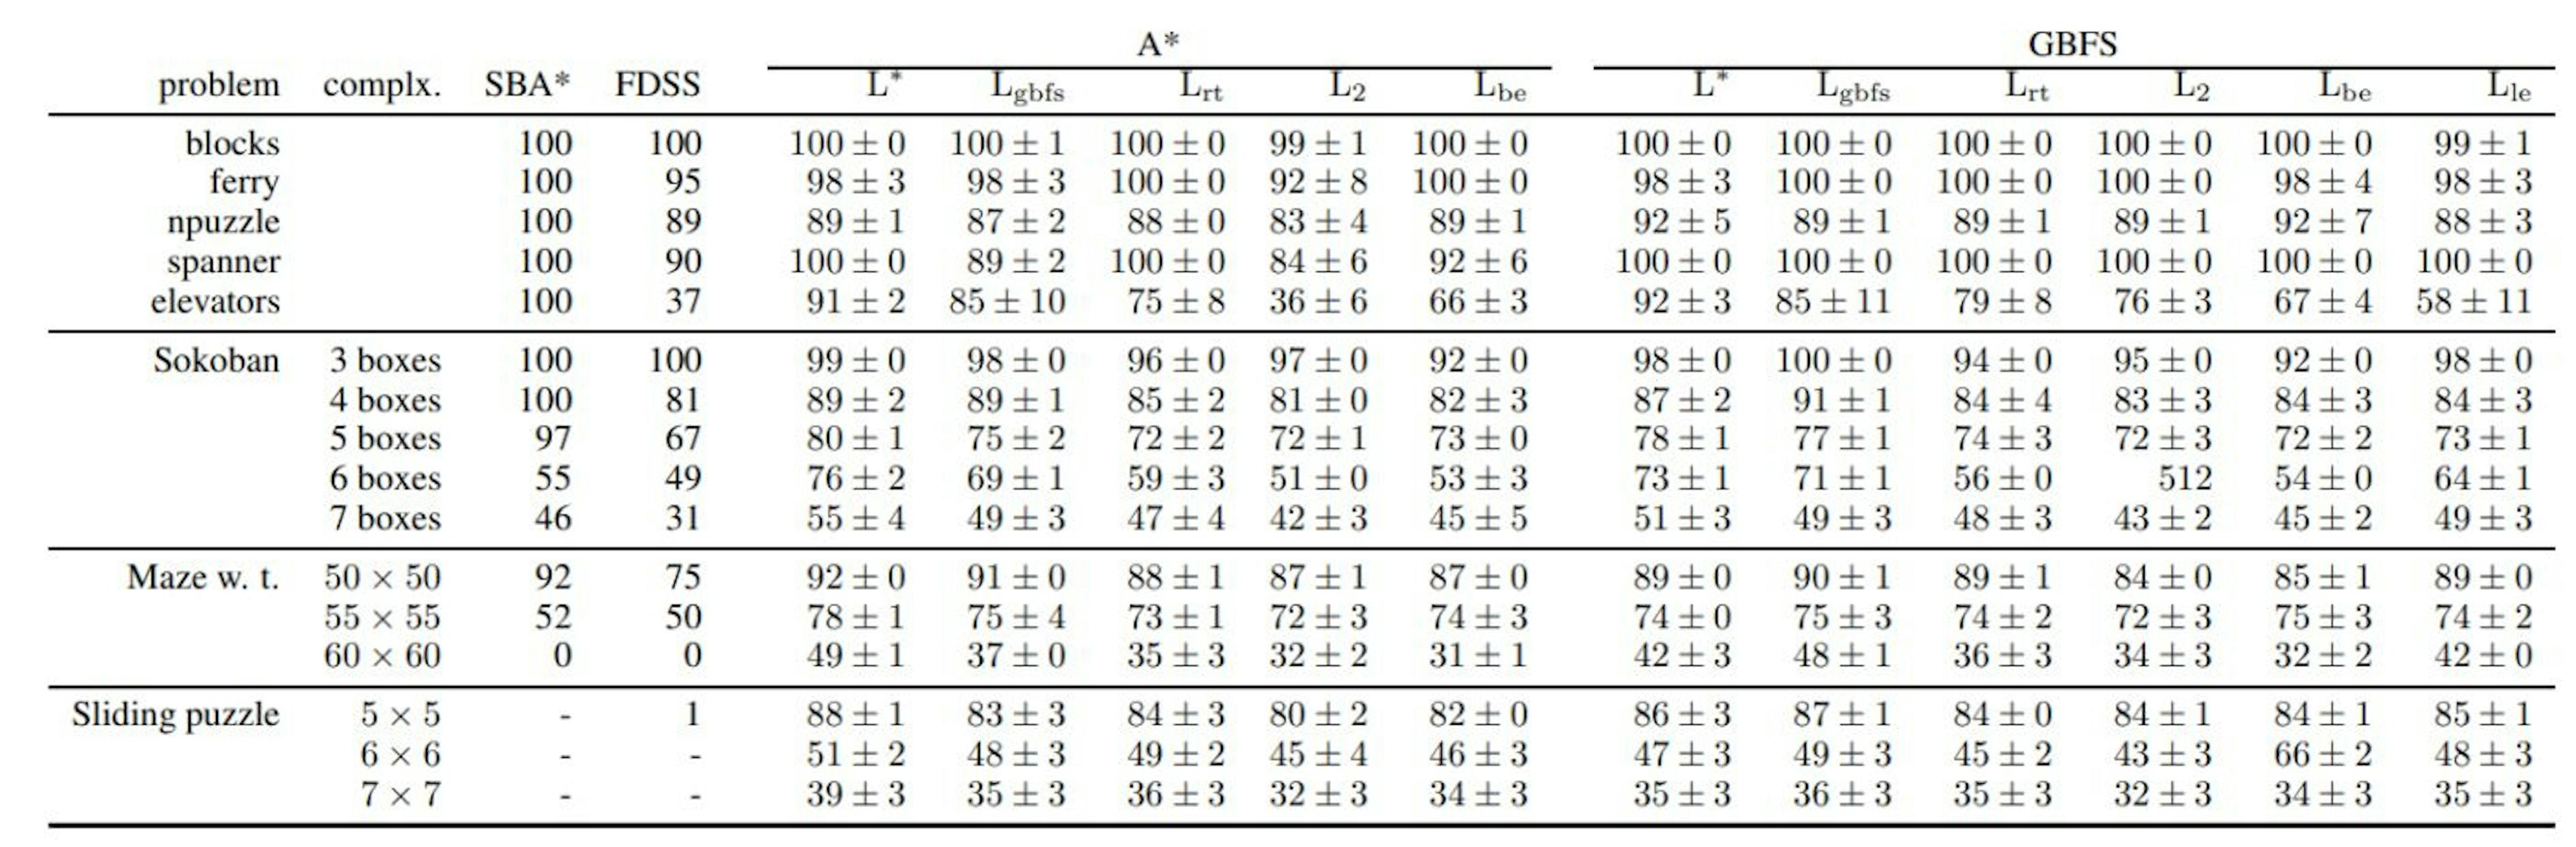 Table 7: Average fraction of solved problem instances in percent with standard deviation. SBA* and FDSS denotes Fast Downward Stone Soup, They are domain independent planners.